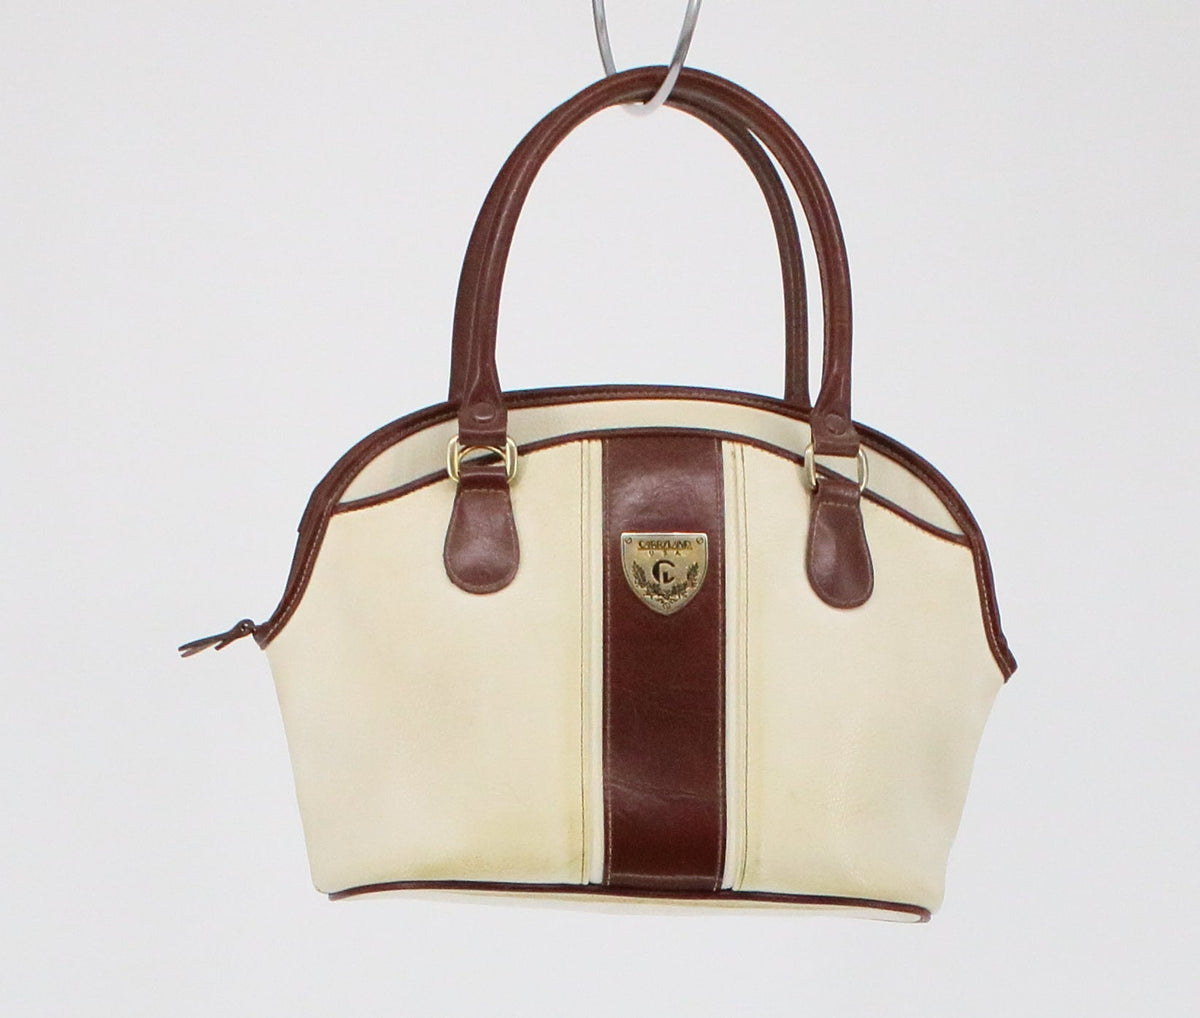 Carriland Cream Bag With Brown Leather details